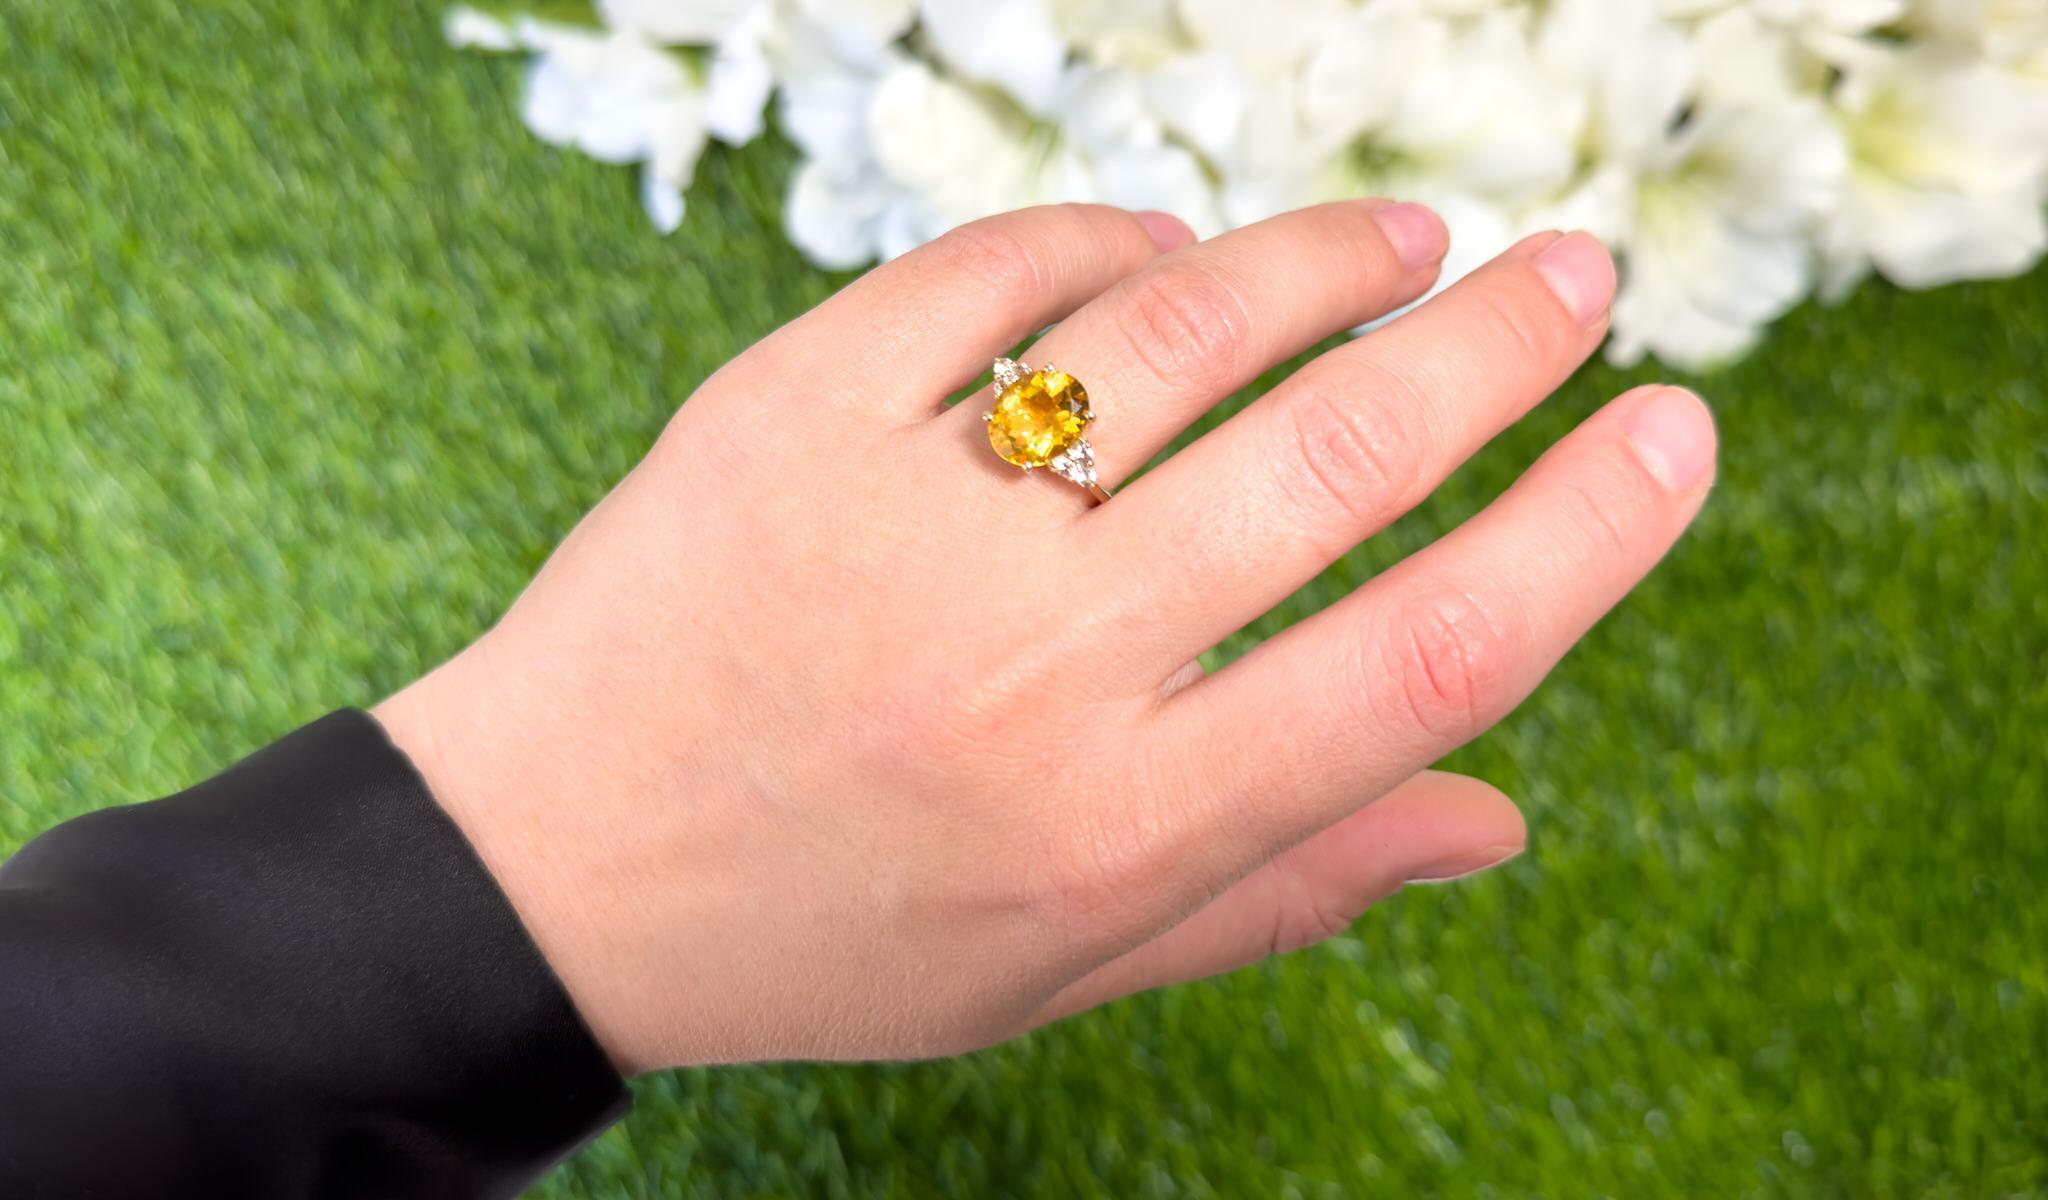 It comes with the Gemological Appraisal by GIA GG/AJP
All Gemstones are Natural
Citrine = 2.80 Carat
6 Diamonds = 0.27 Carats
Metal: 10K Yellow Gold
Ring Size: 7* US
*It can be resized complimentary